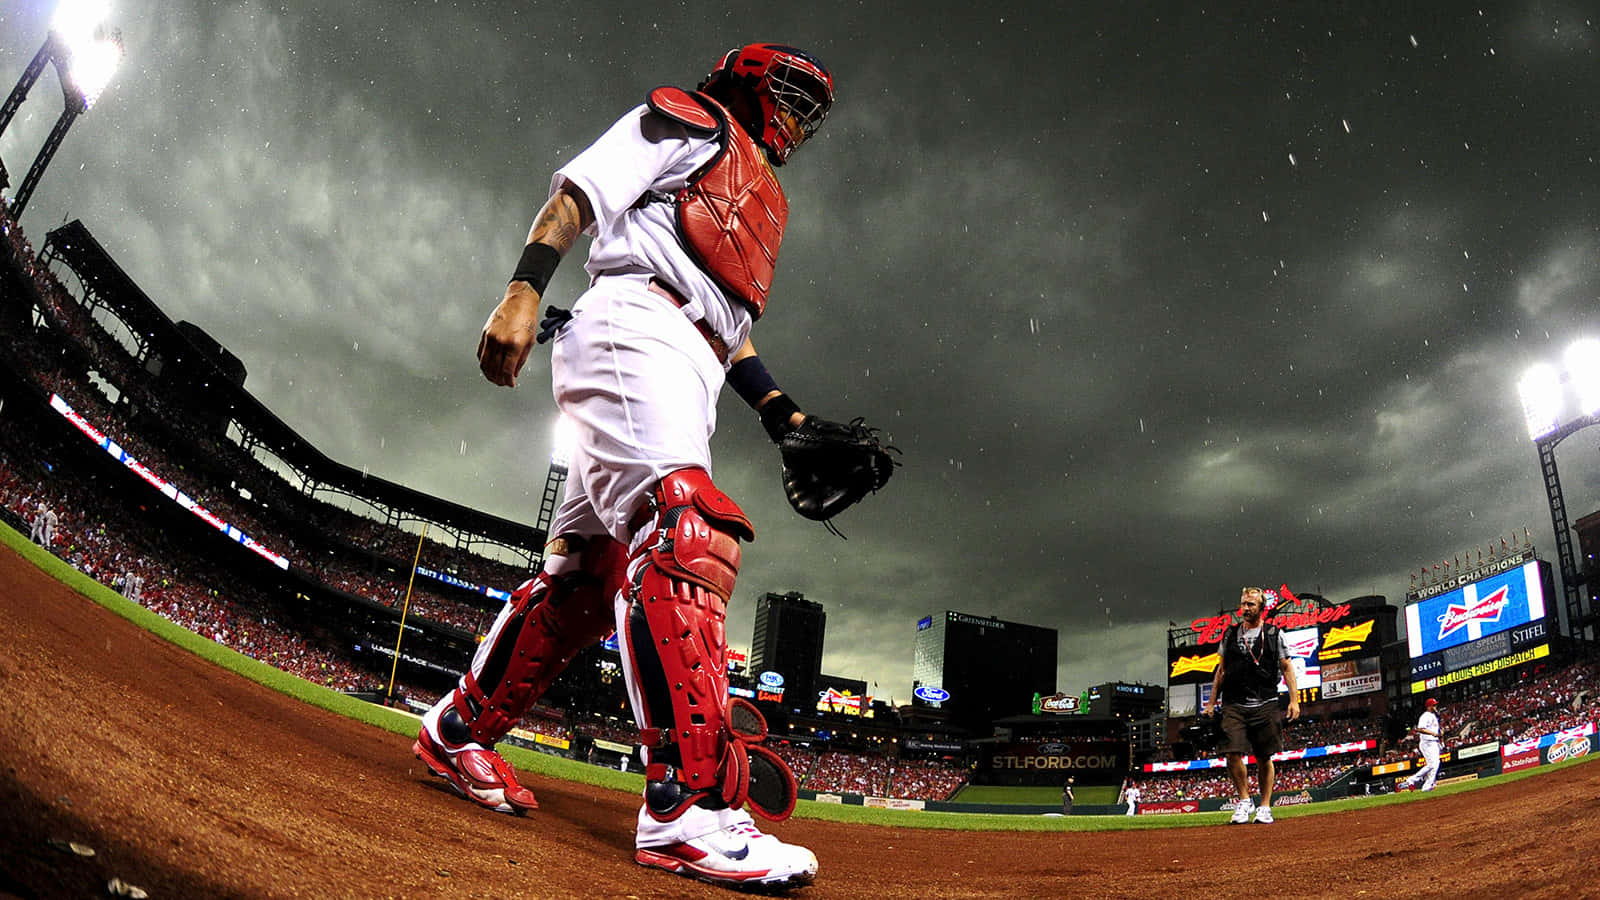 Download Yadier Molina on the field Wallpaper